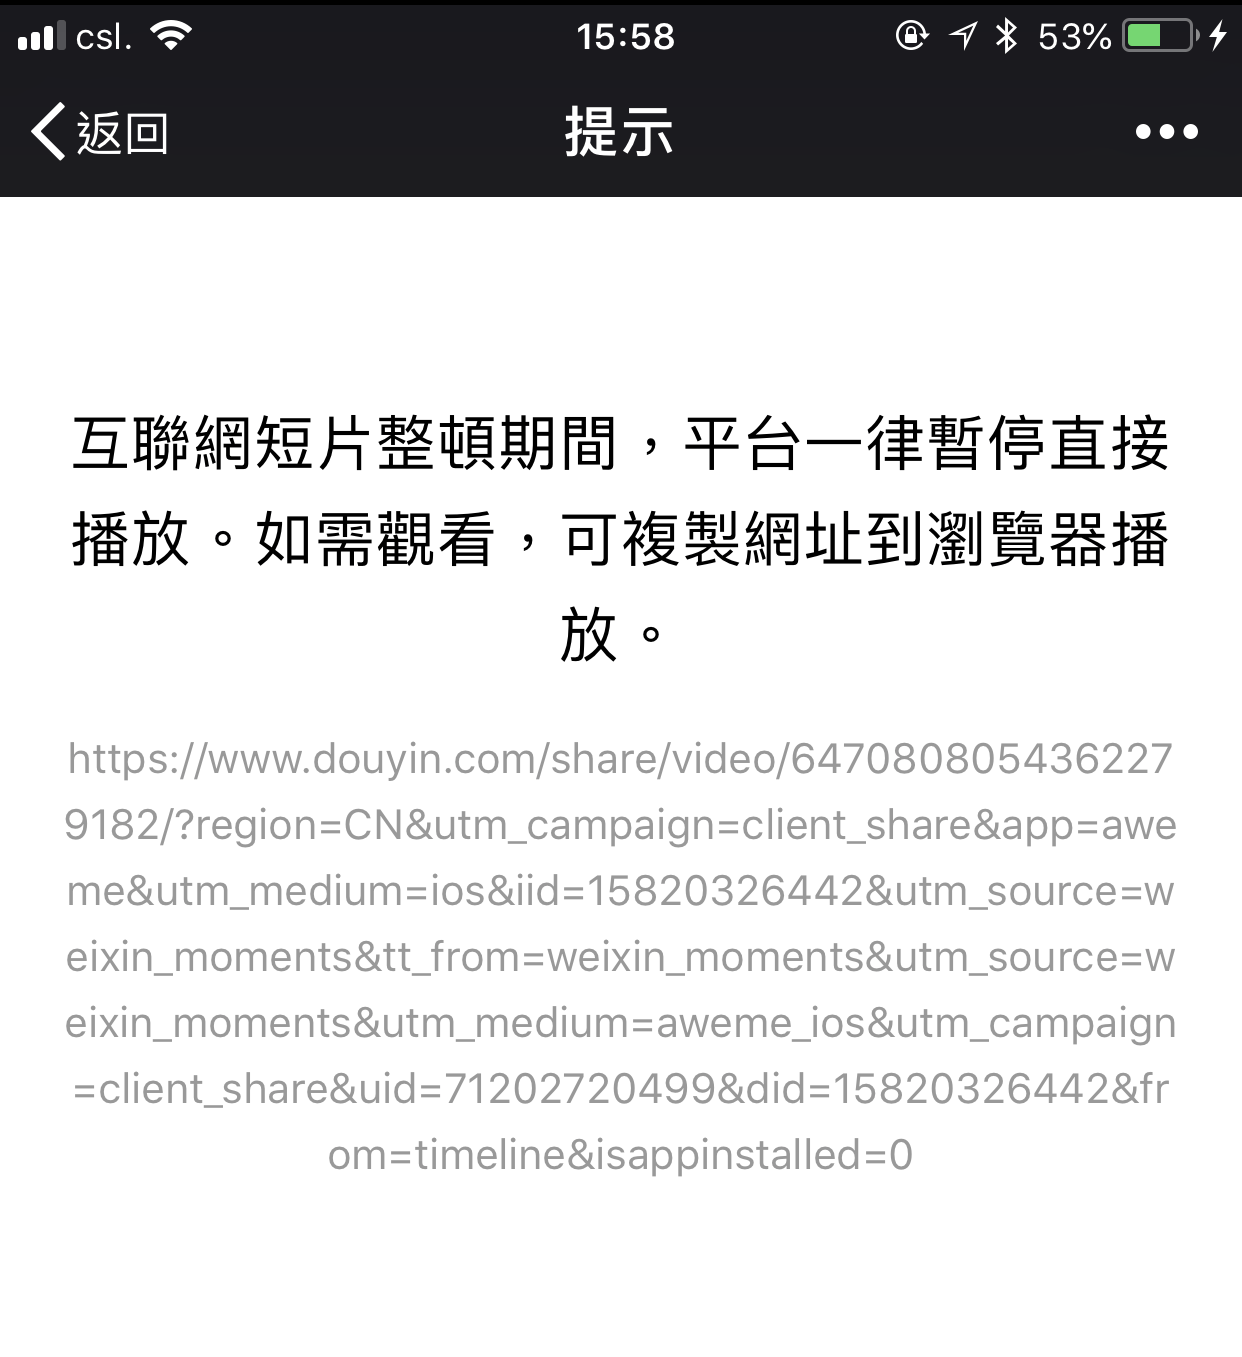 Example of a video shared from Douyin being banned on WeChat. Photo: Screenshot of WeChat